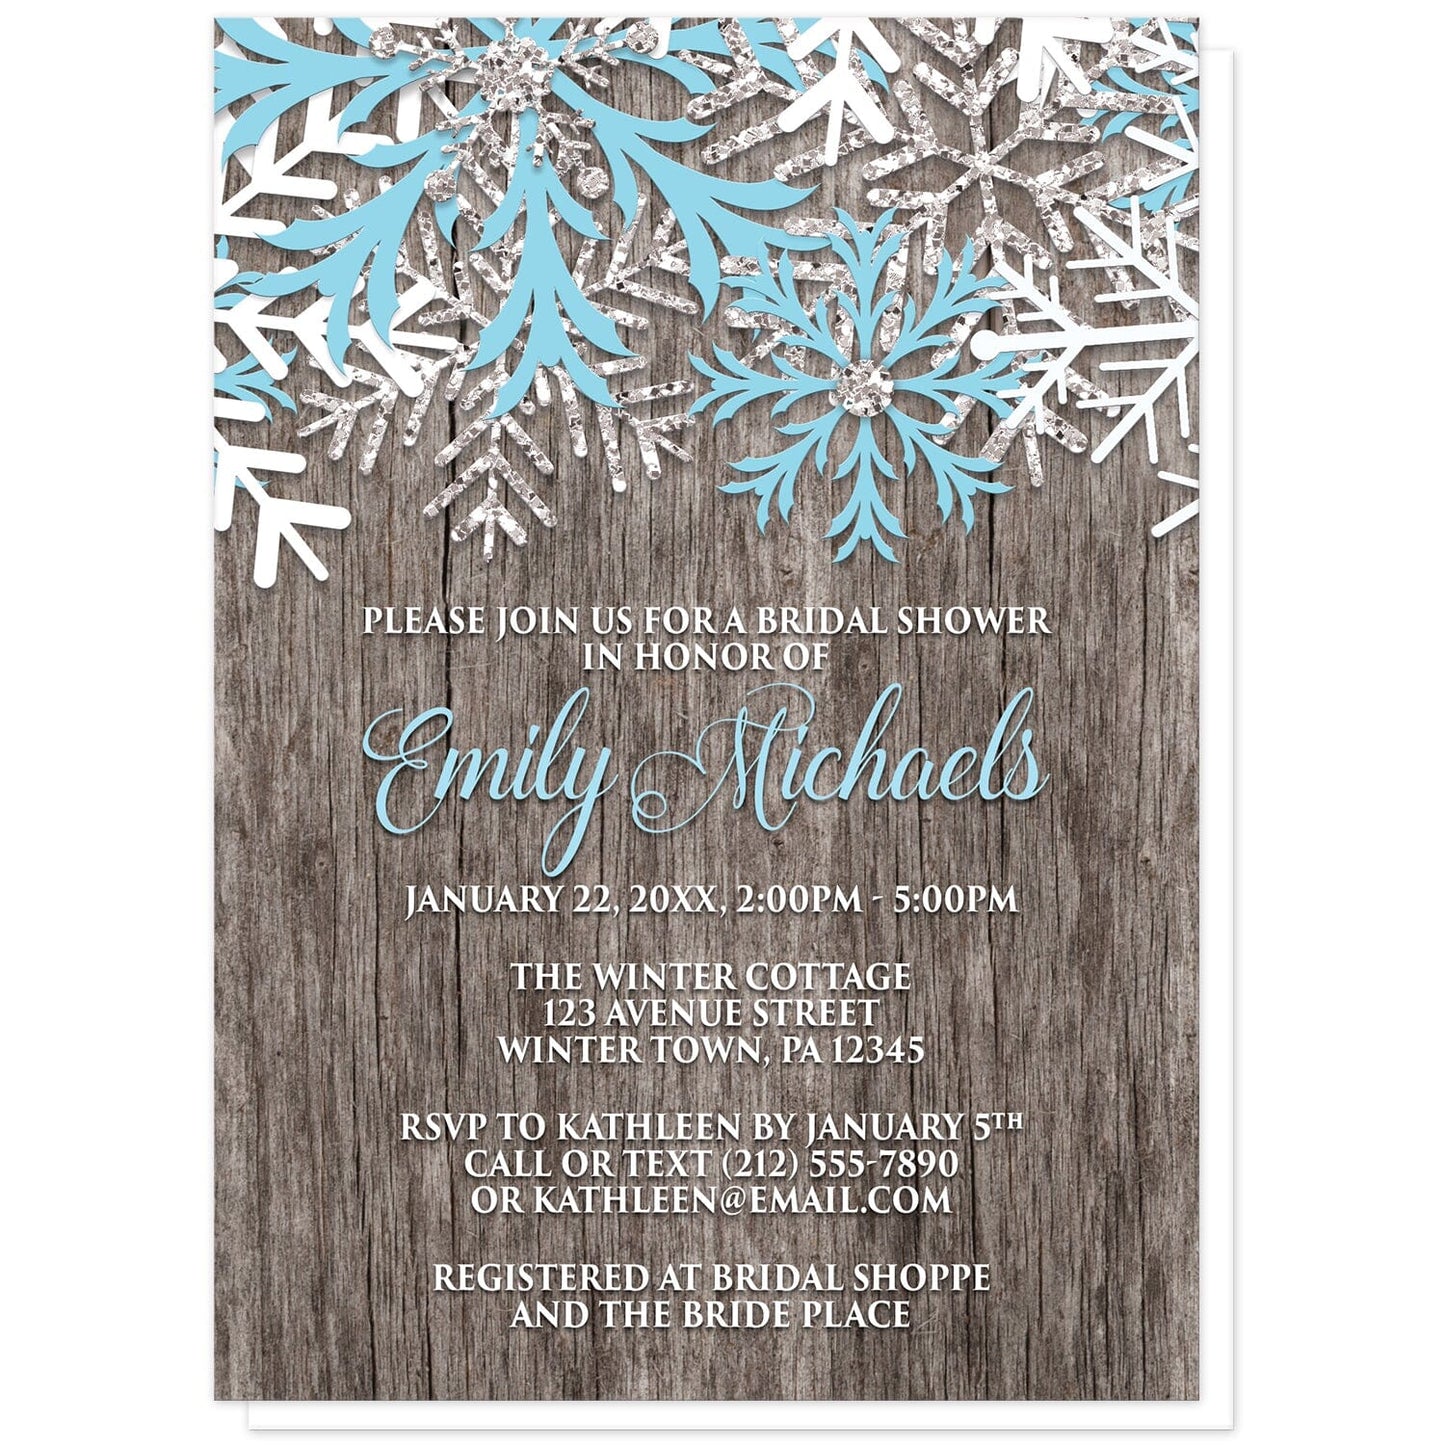 Rustic Winter Wood Blue Snowflake Bridal Shower Invitations at Artistically Invited. Country-inspired rustic winter wood blue snowflake bridal shower invitations designed with light blue, white, and silver-colored glitter-illustrated snowflakes along the top over a rustic wood pattern illustration. Your personalized bridal shower celebration details are custom printed in light blue and white over the wood background below the snowflakes.